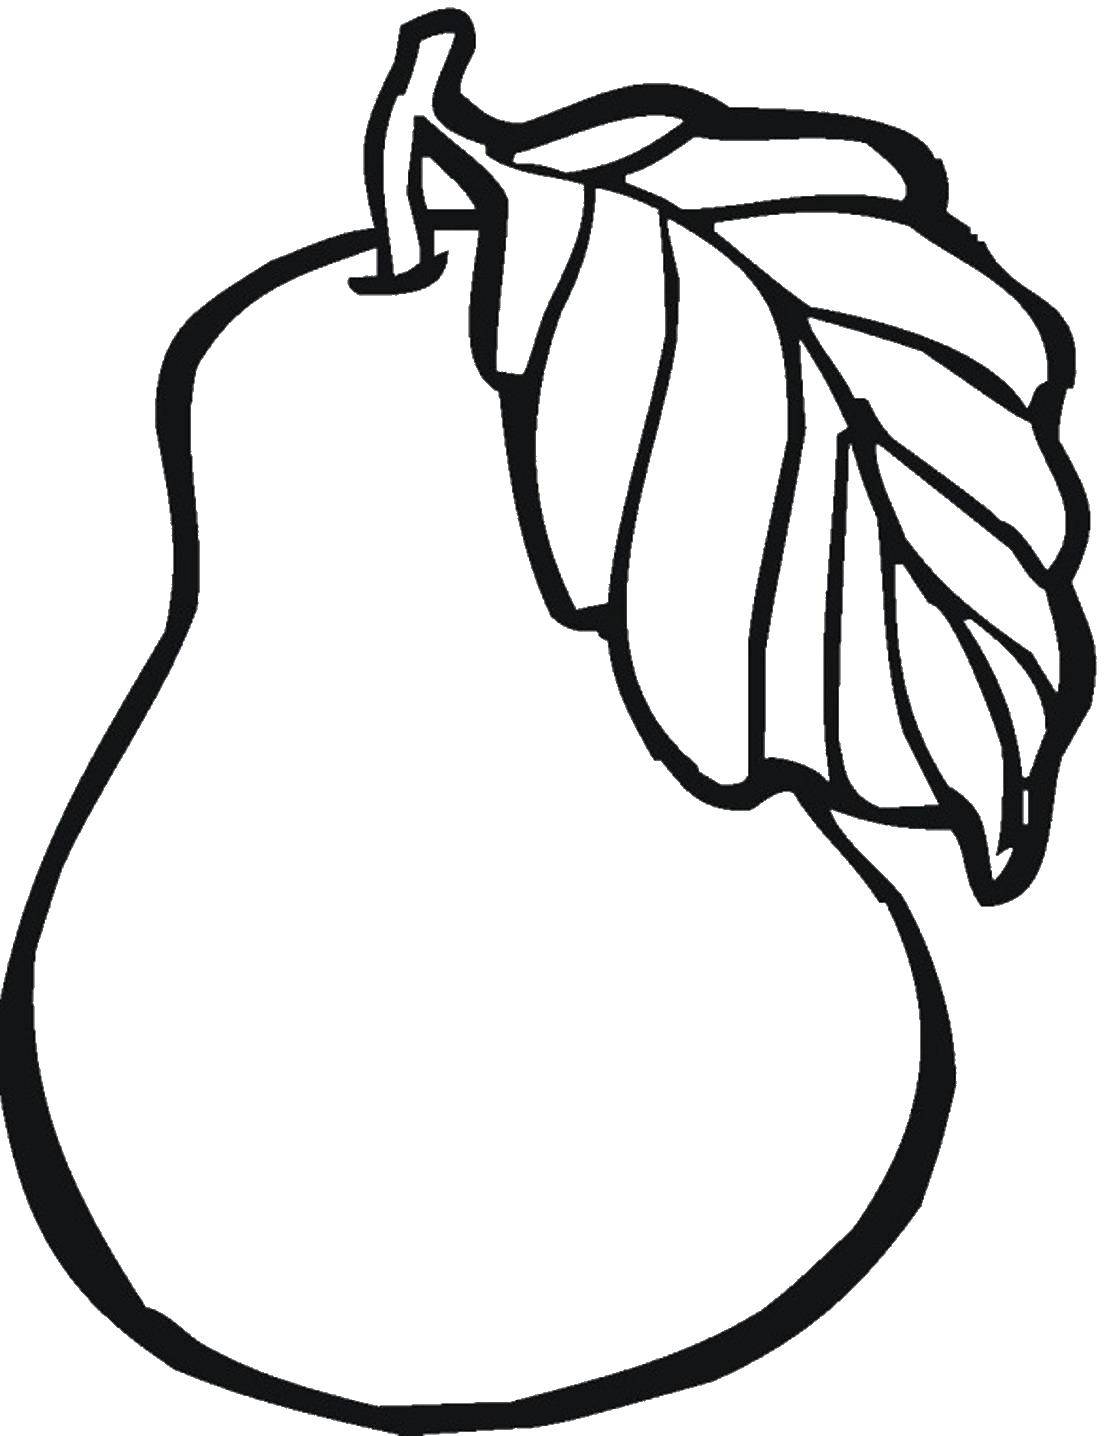 Coloring A large leaf on the pear. Category Coloring pages for kids. Tags:  fruit, pear.